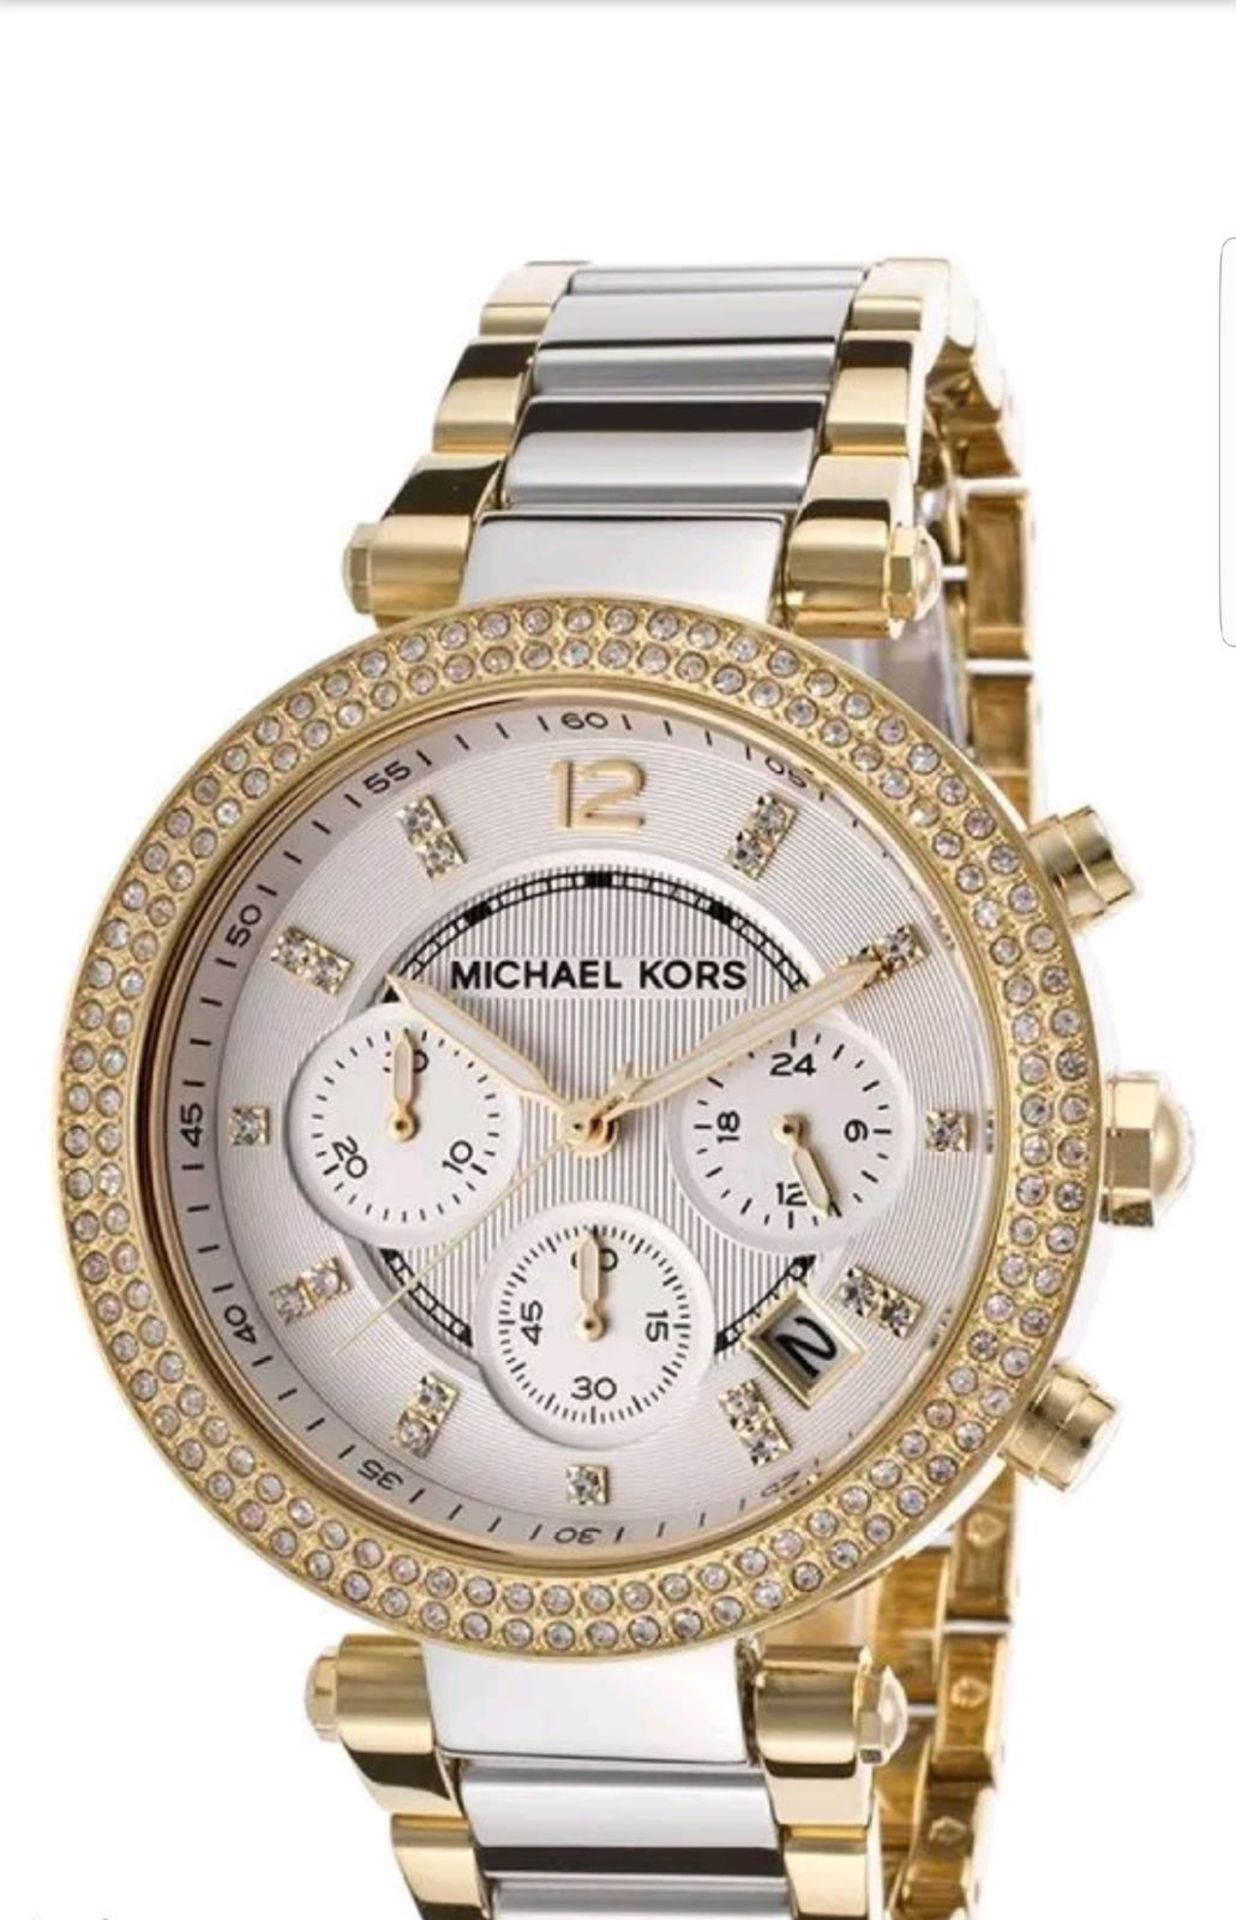 BRAND NEW LADIES MICHAEL KORS WATCH MK5687, COMPLETE WITH ORIGINAL BOX AND MANUAL